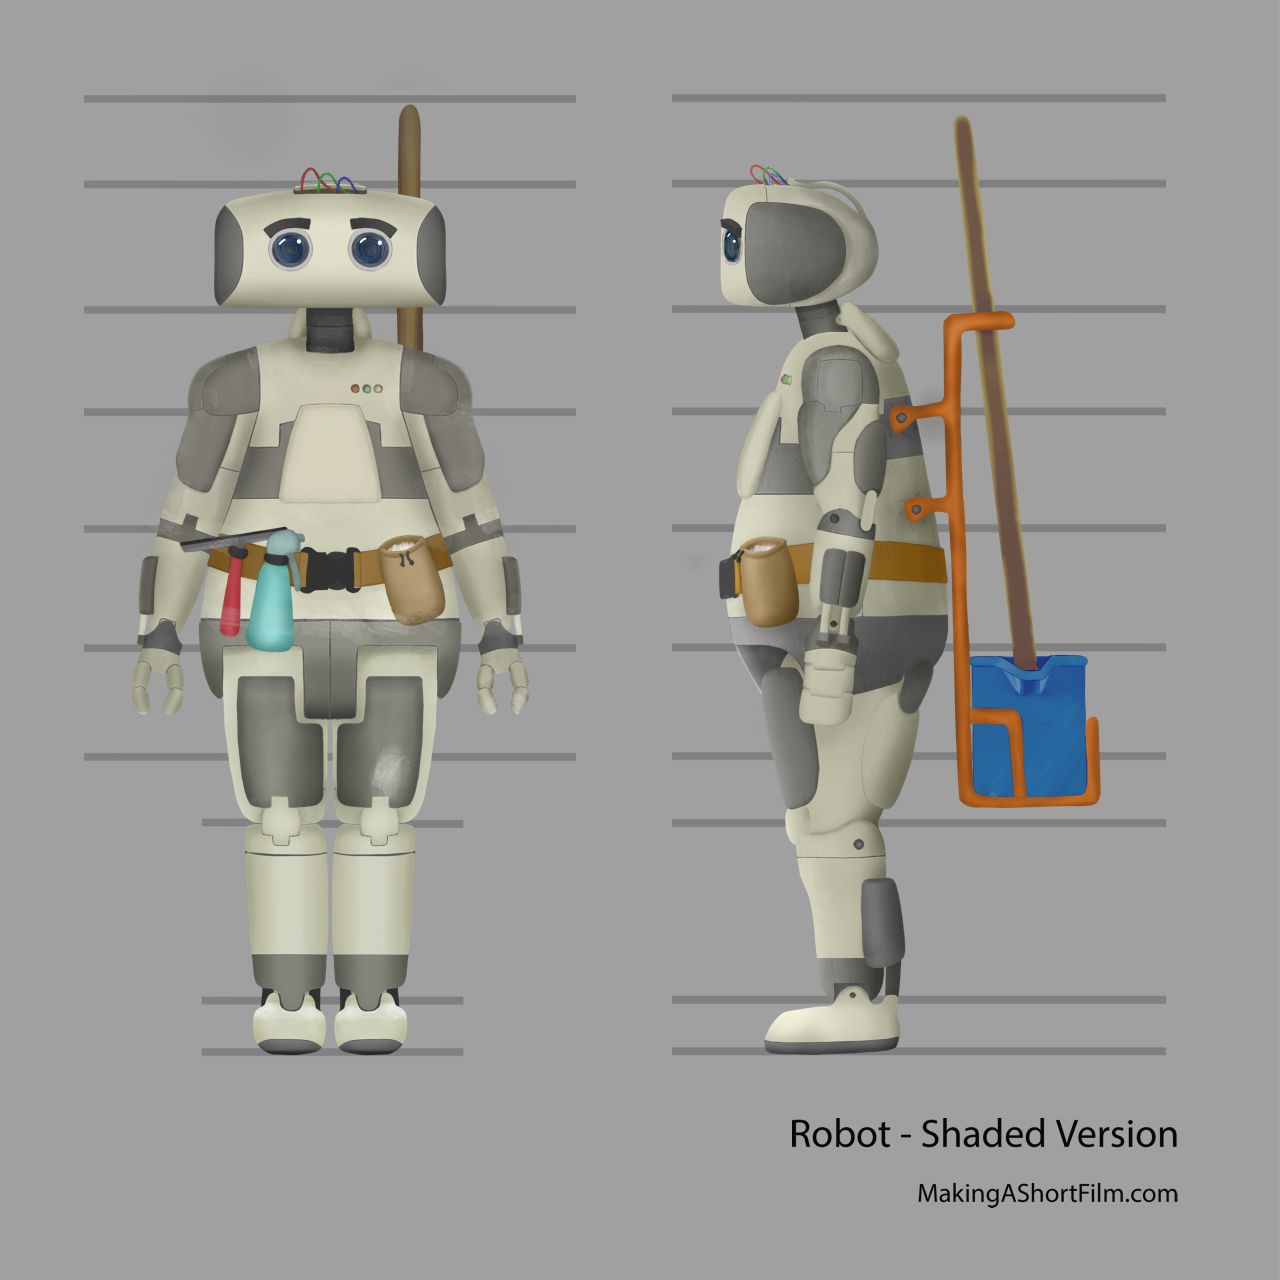 The completed Robot concept art